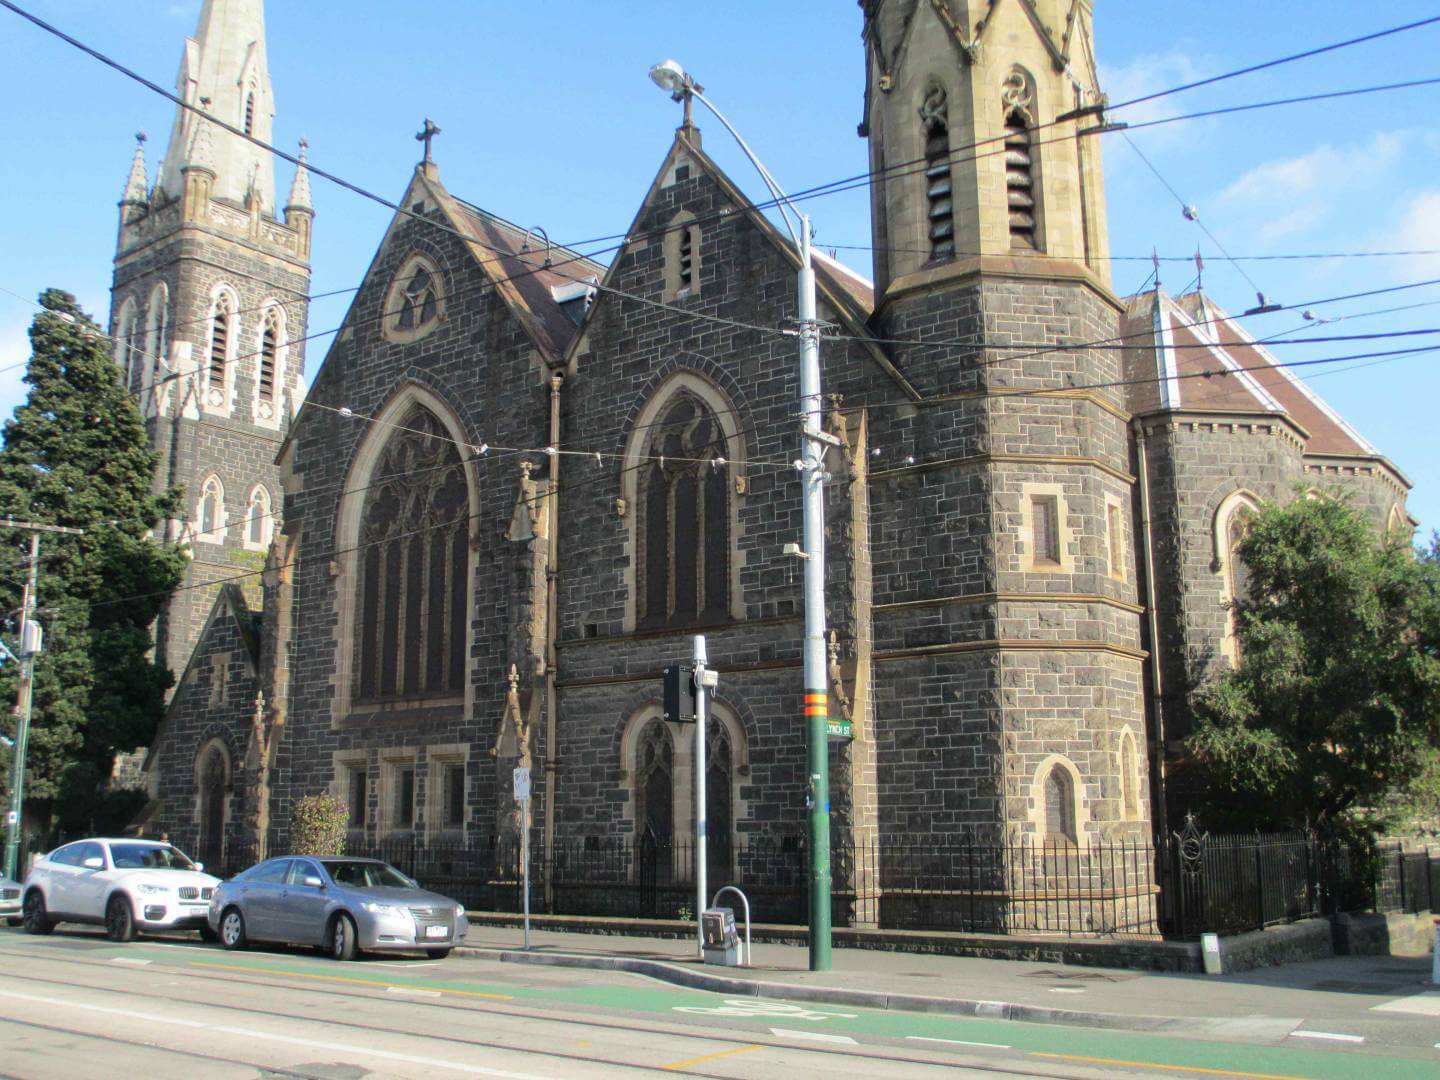 The Immaculate Conception Catholic Church